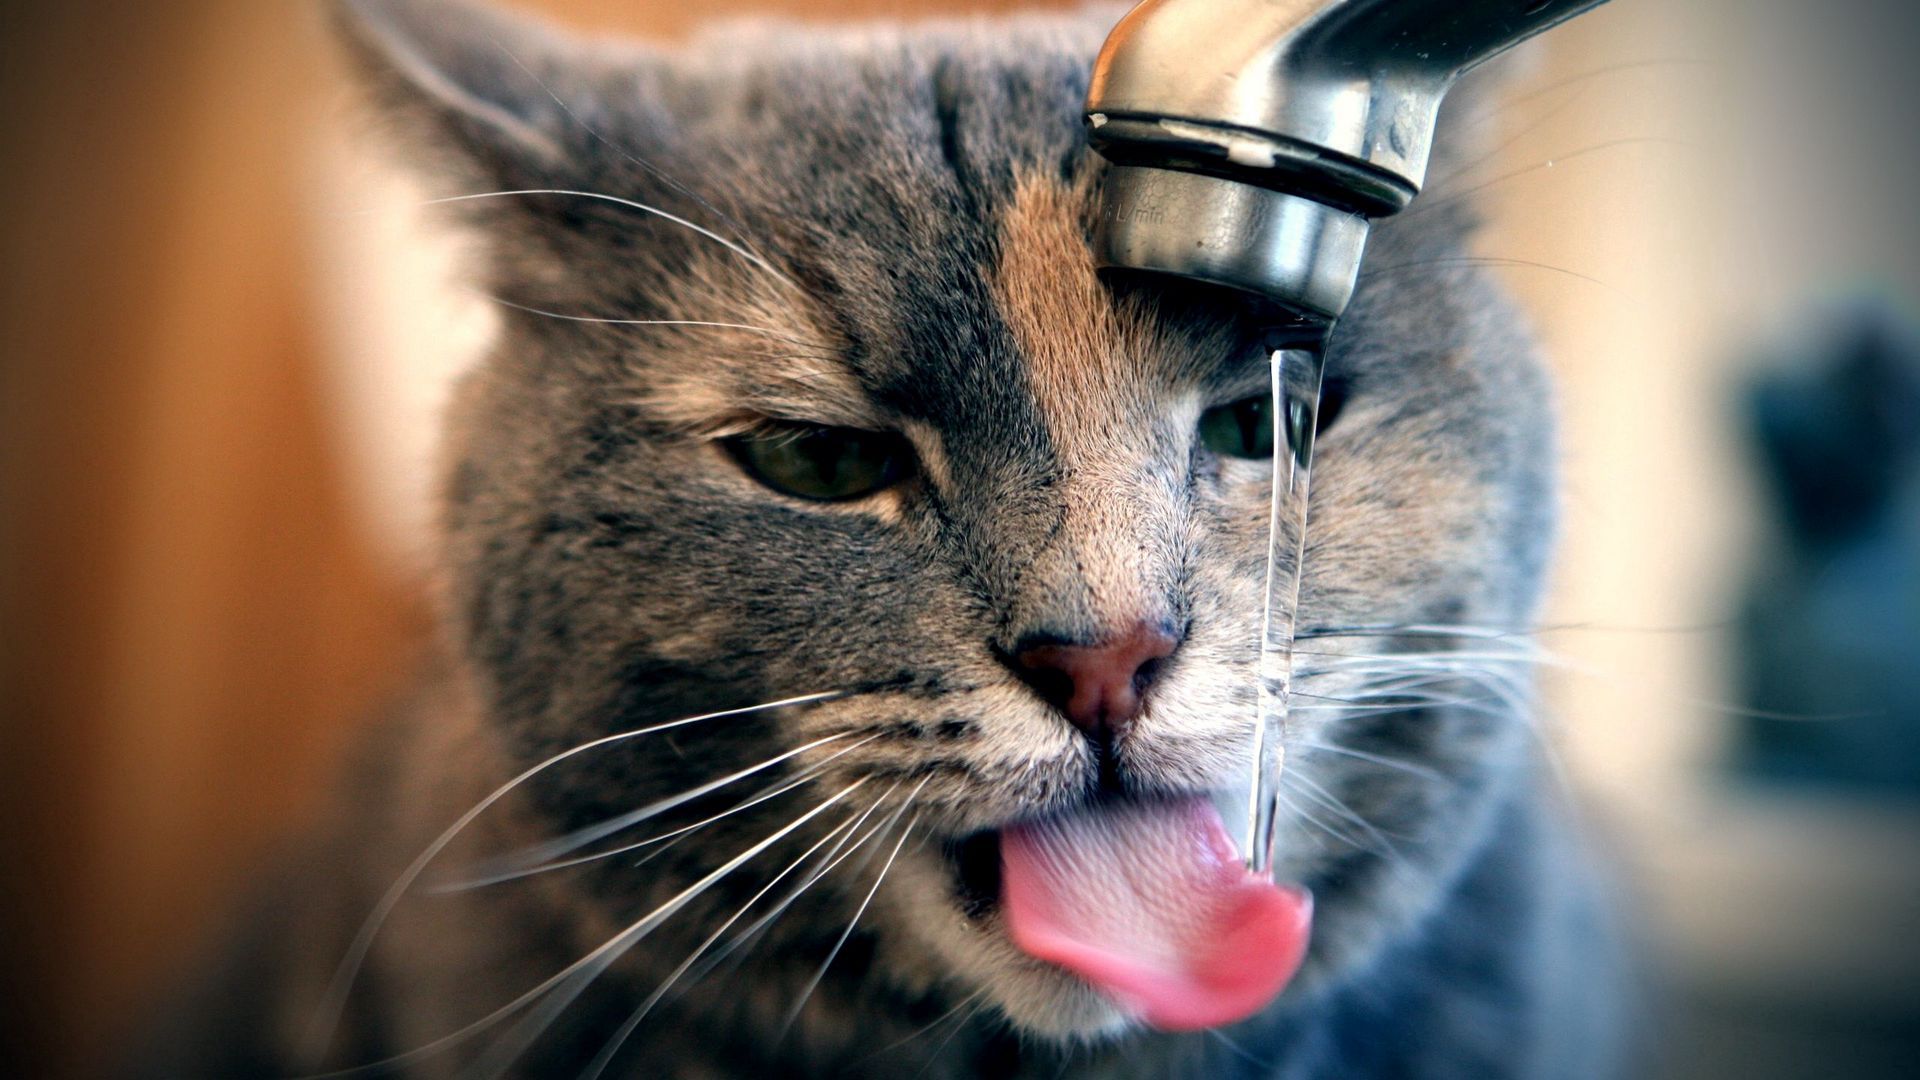 Wallpaper cat water drops tap thirst drink. Cat facts, Cats, Funny cat picture